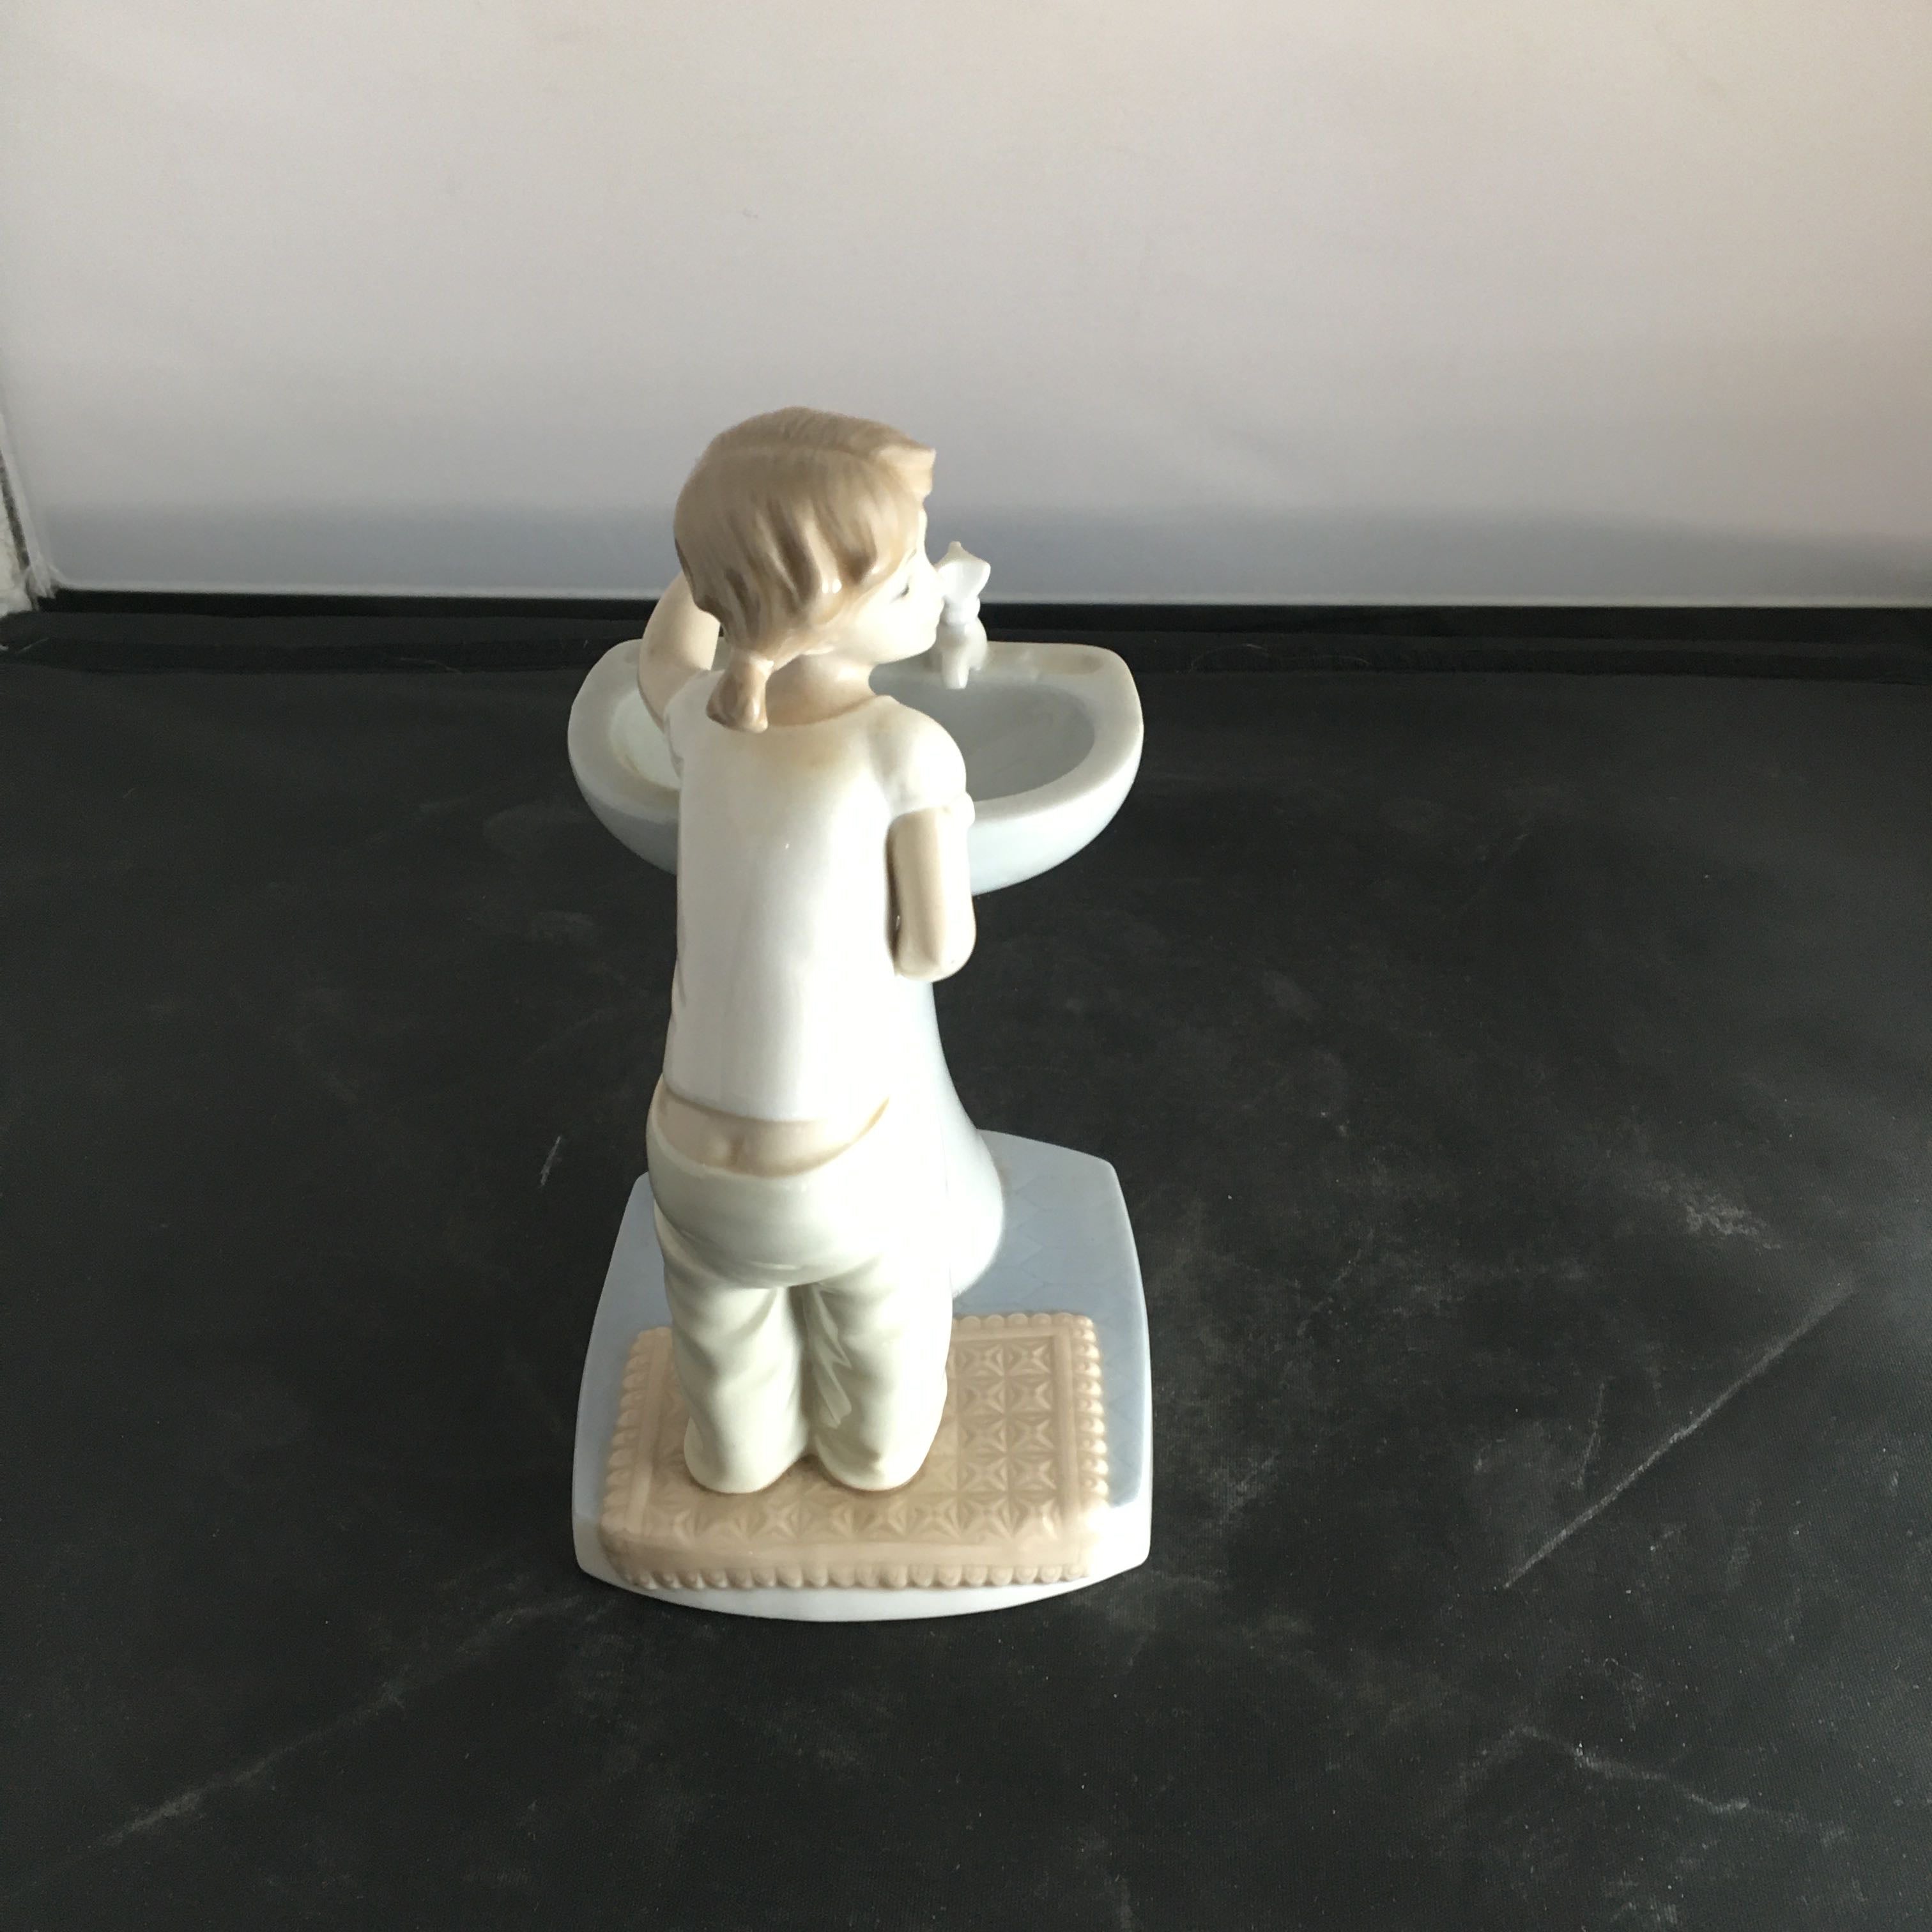 Lladro Little Girl with Pigtails at Sink Clean Up Time Home Decor